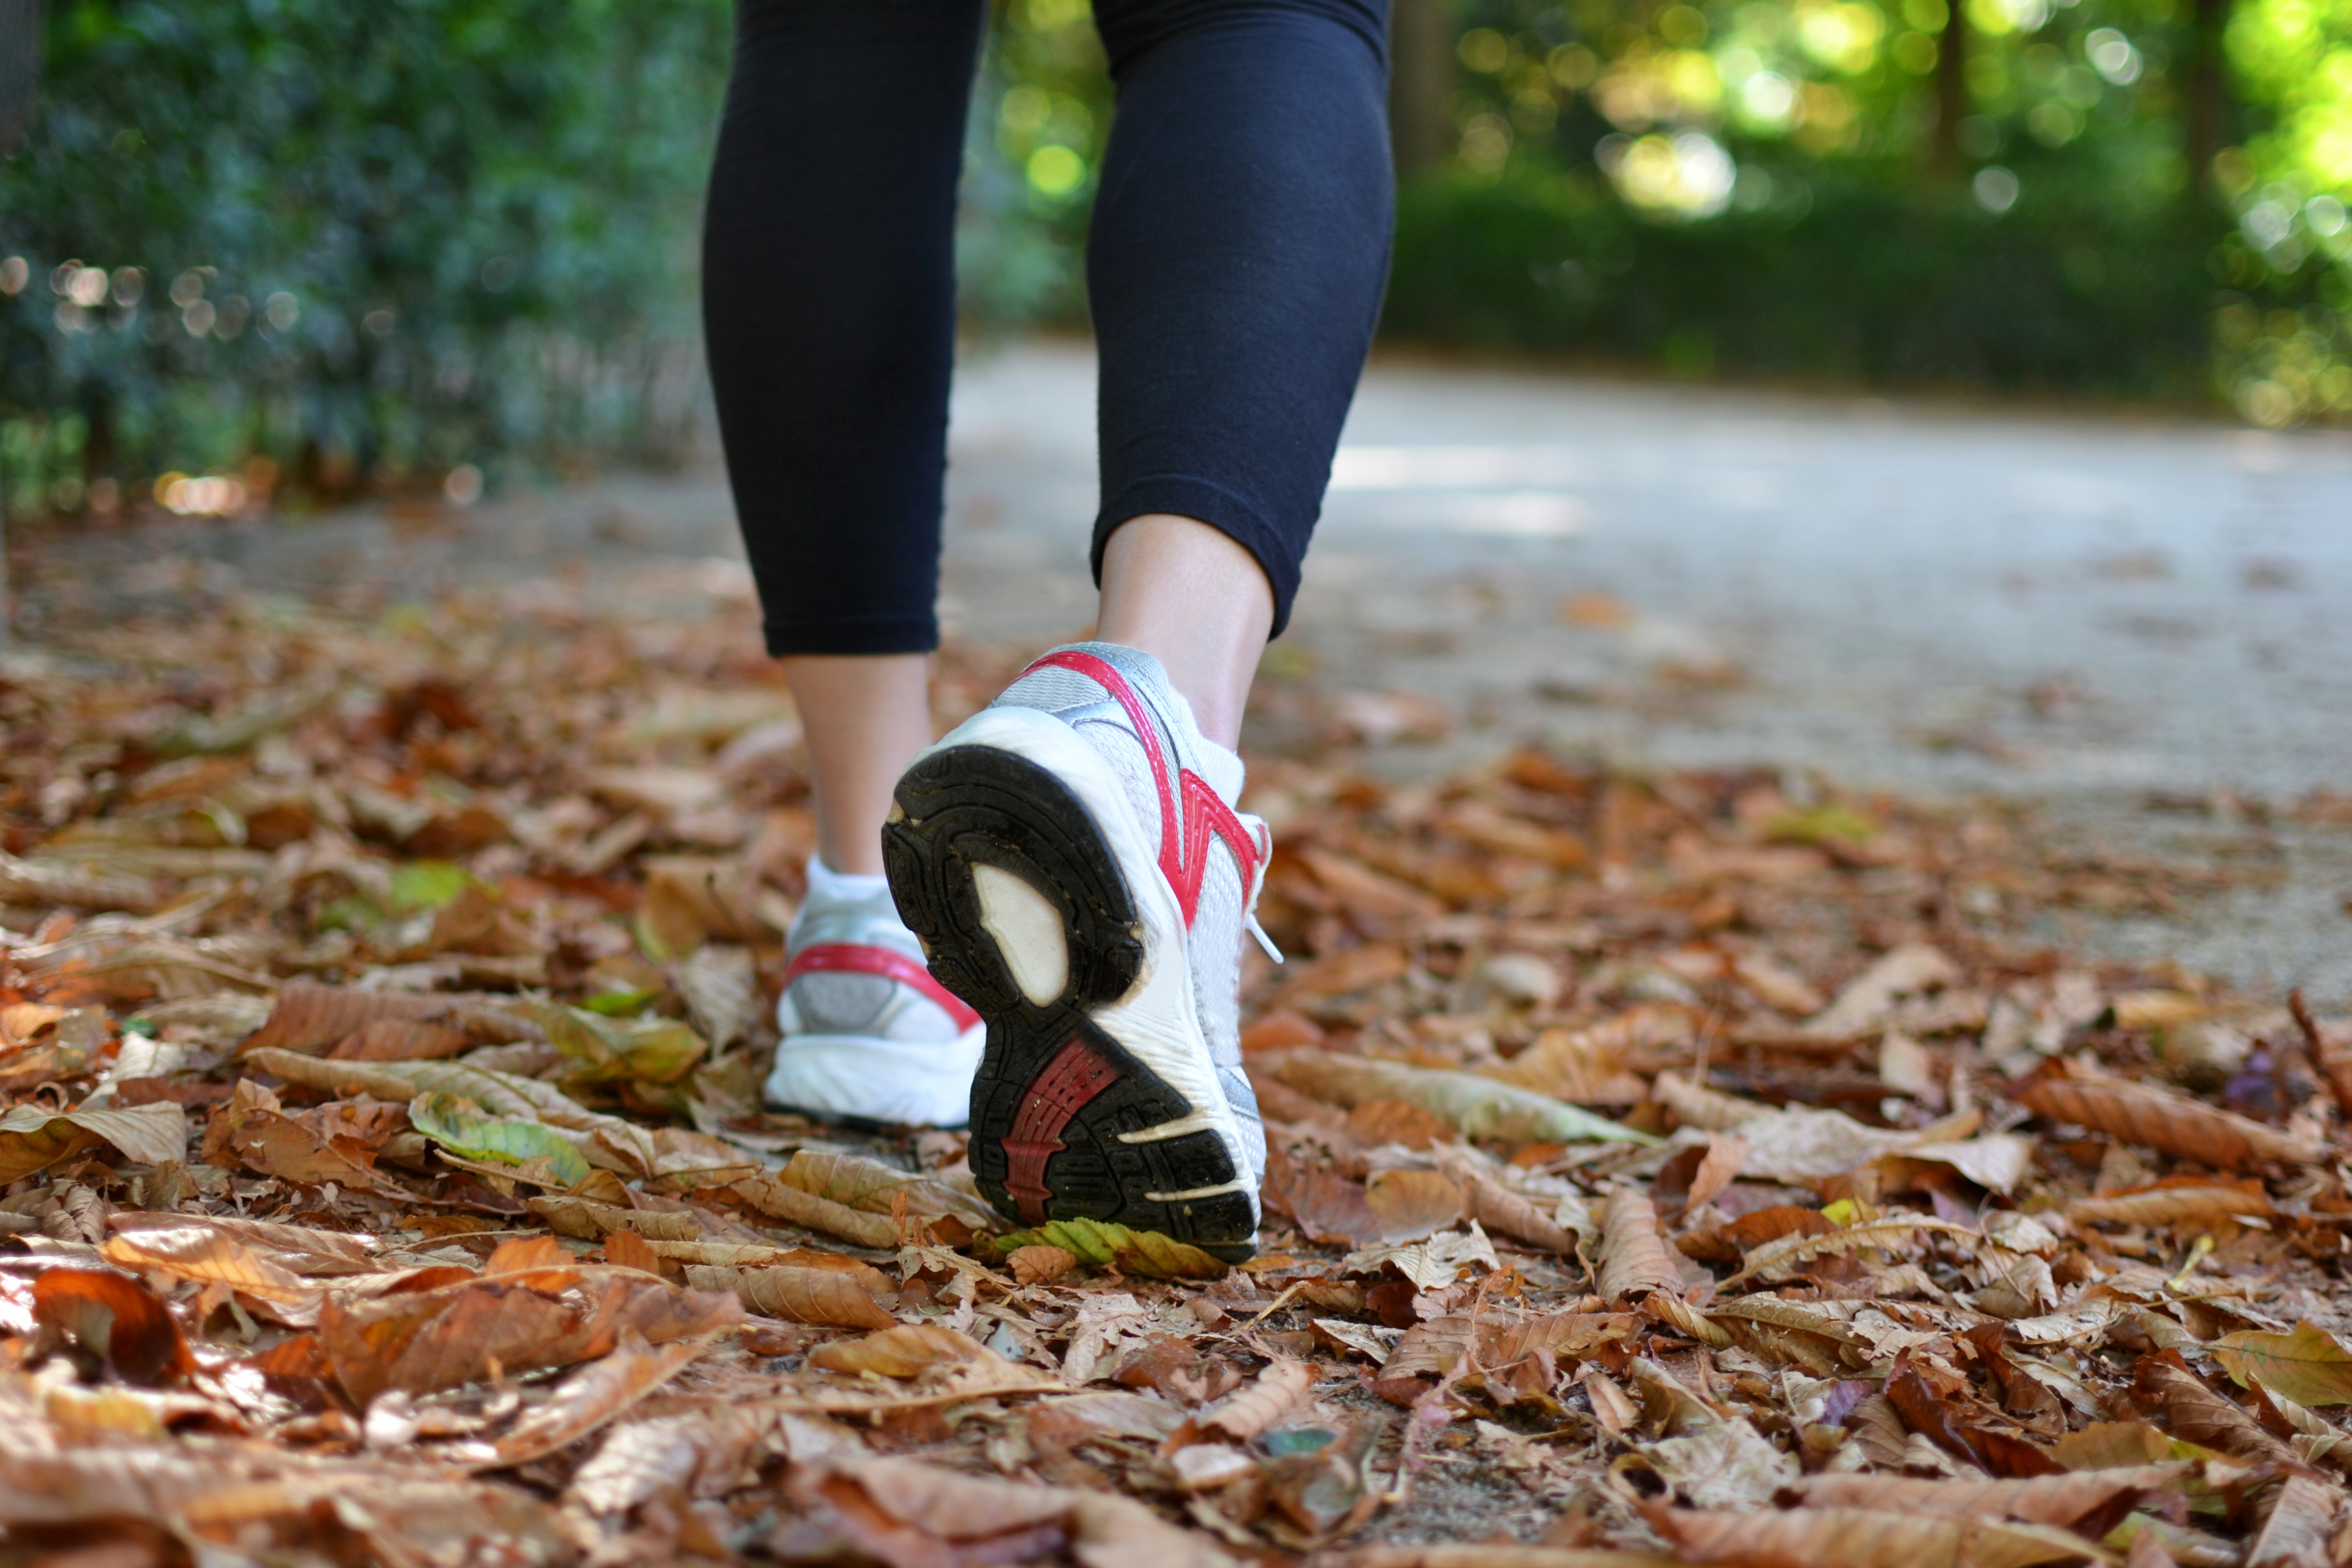 Women wearing running shoes in autumn leaves